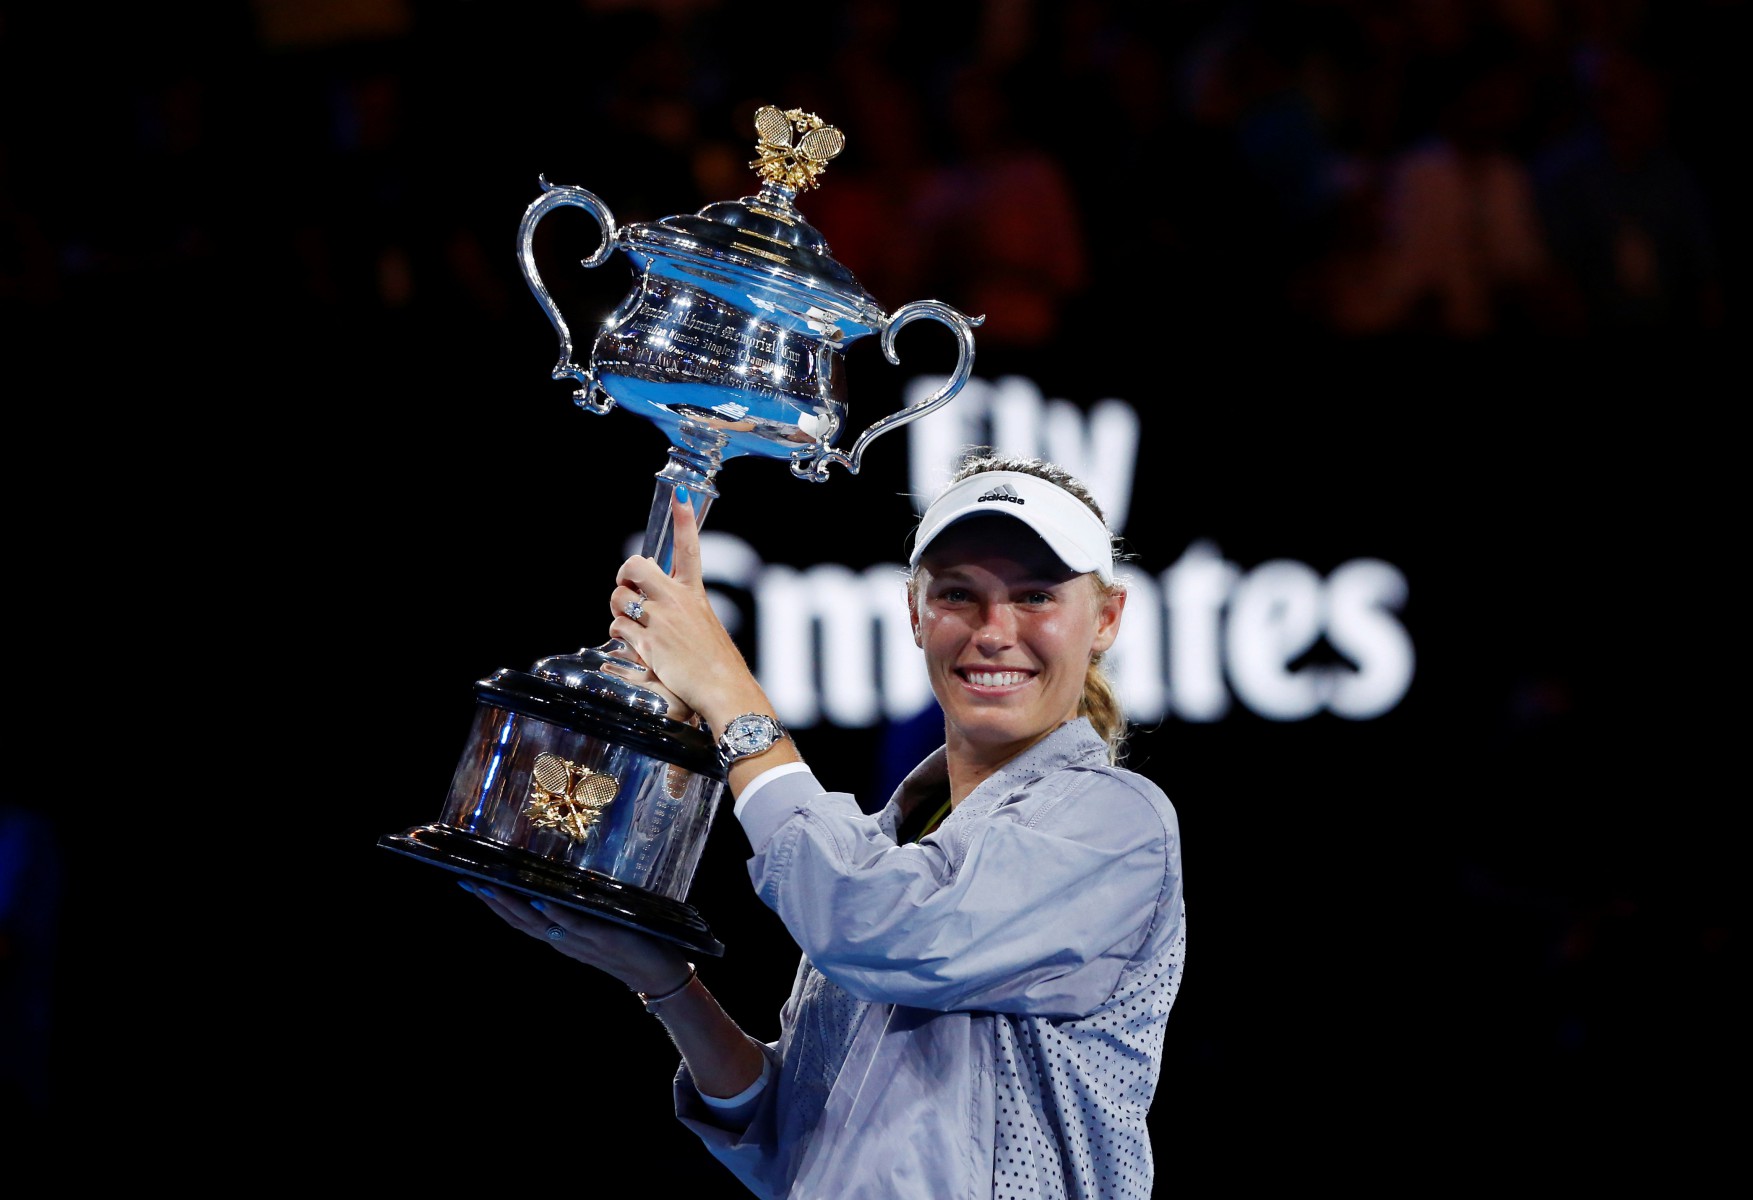 , Australian Open 2020 FREE: Live stream, TV channel, full schedule and bushfire info ahead of first Slam of the year